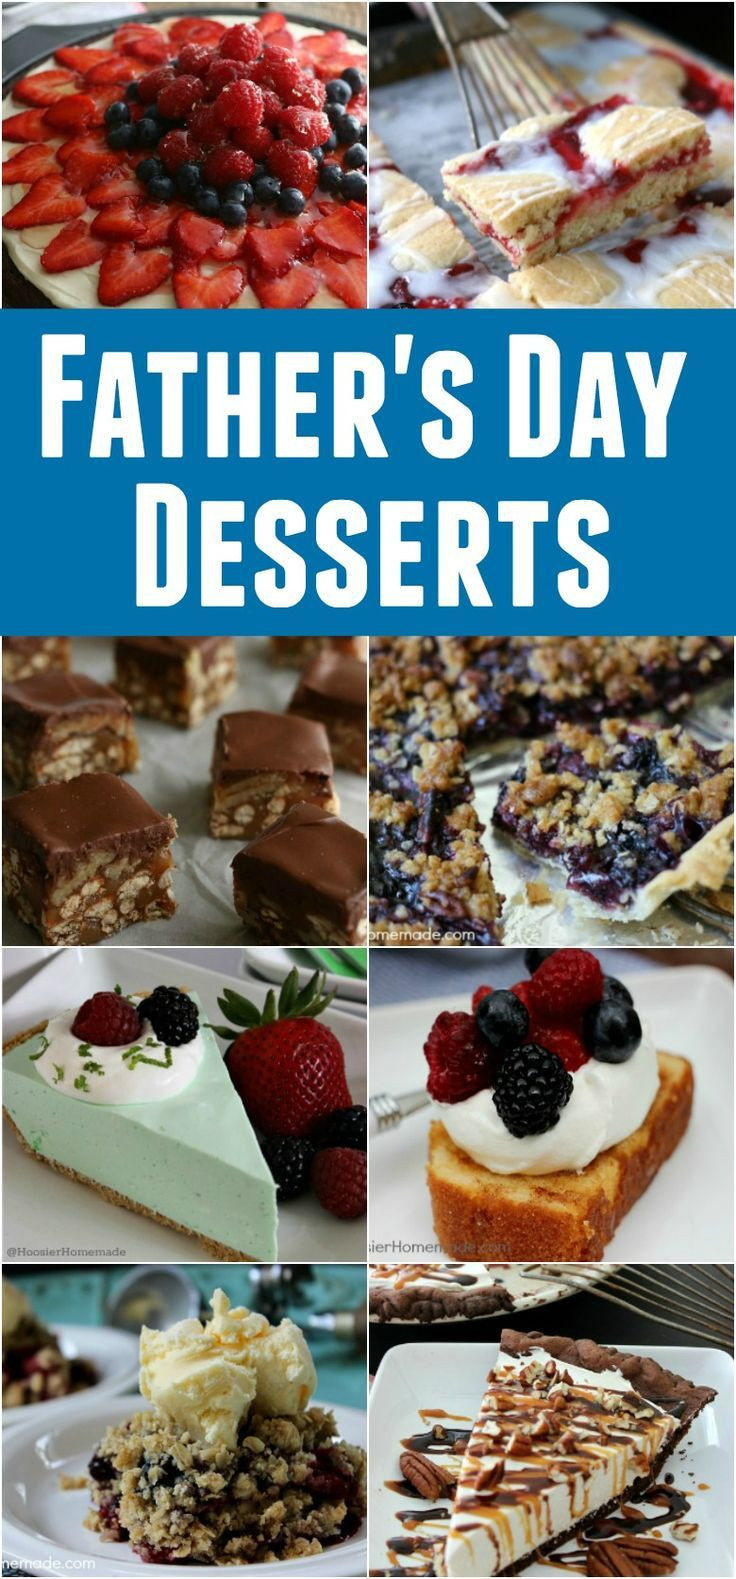 Mother'S Day Dessert Recipes
 The 20 Best Ideas for Desserts for Mother s Day Best